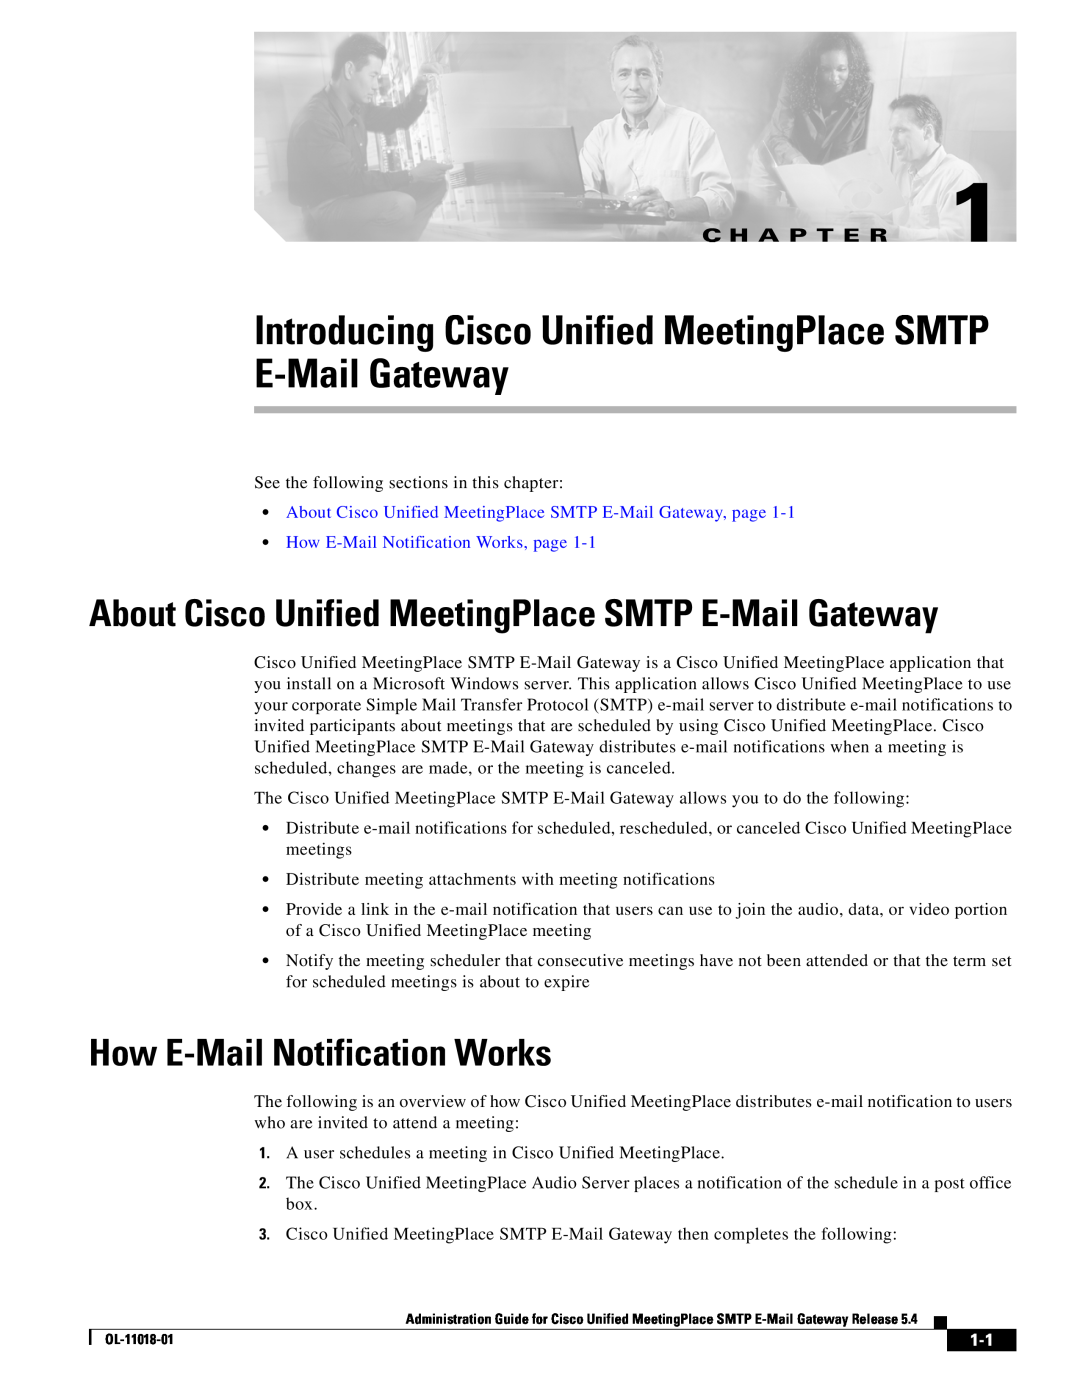 Cisco Systems manual Introducing Cisco Unified MeetingPlace SMTP E-Mail Gateway, C H A P T E R 